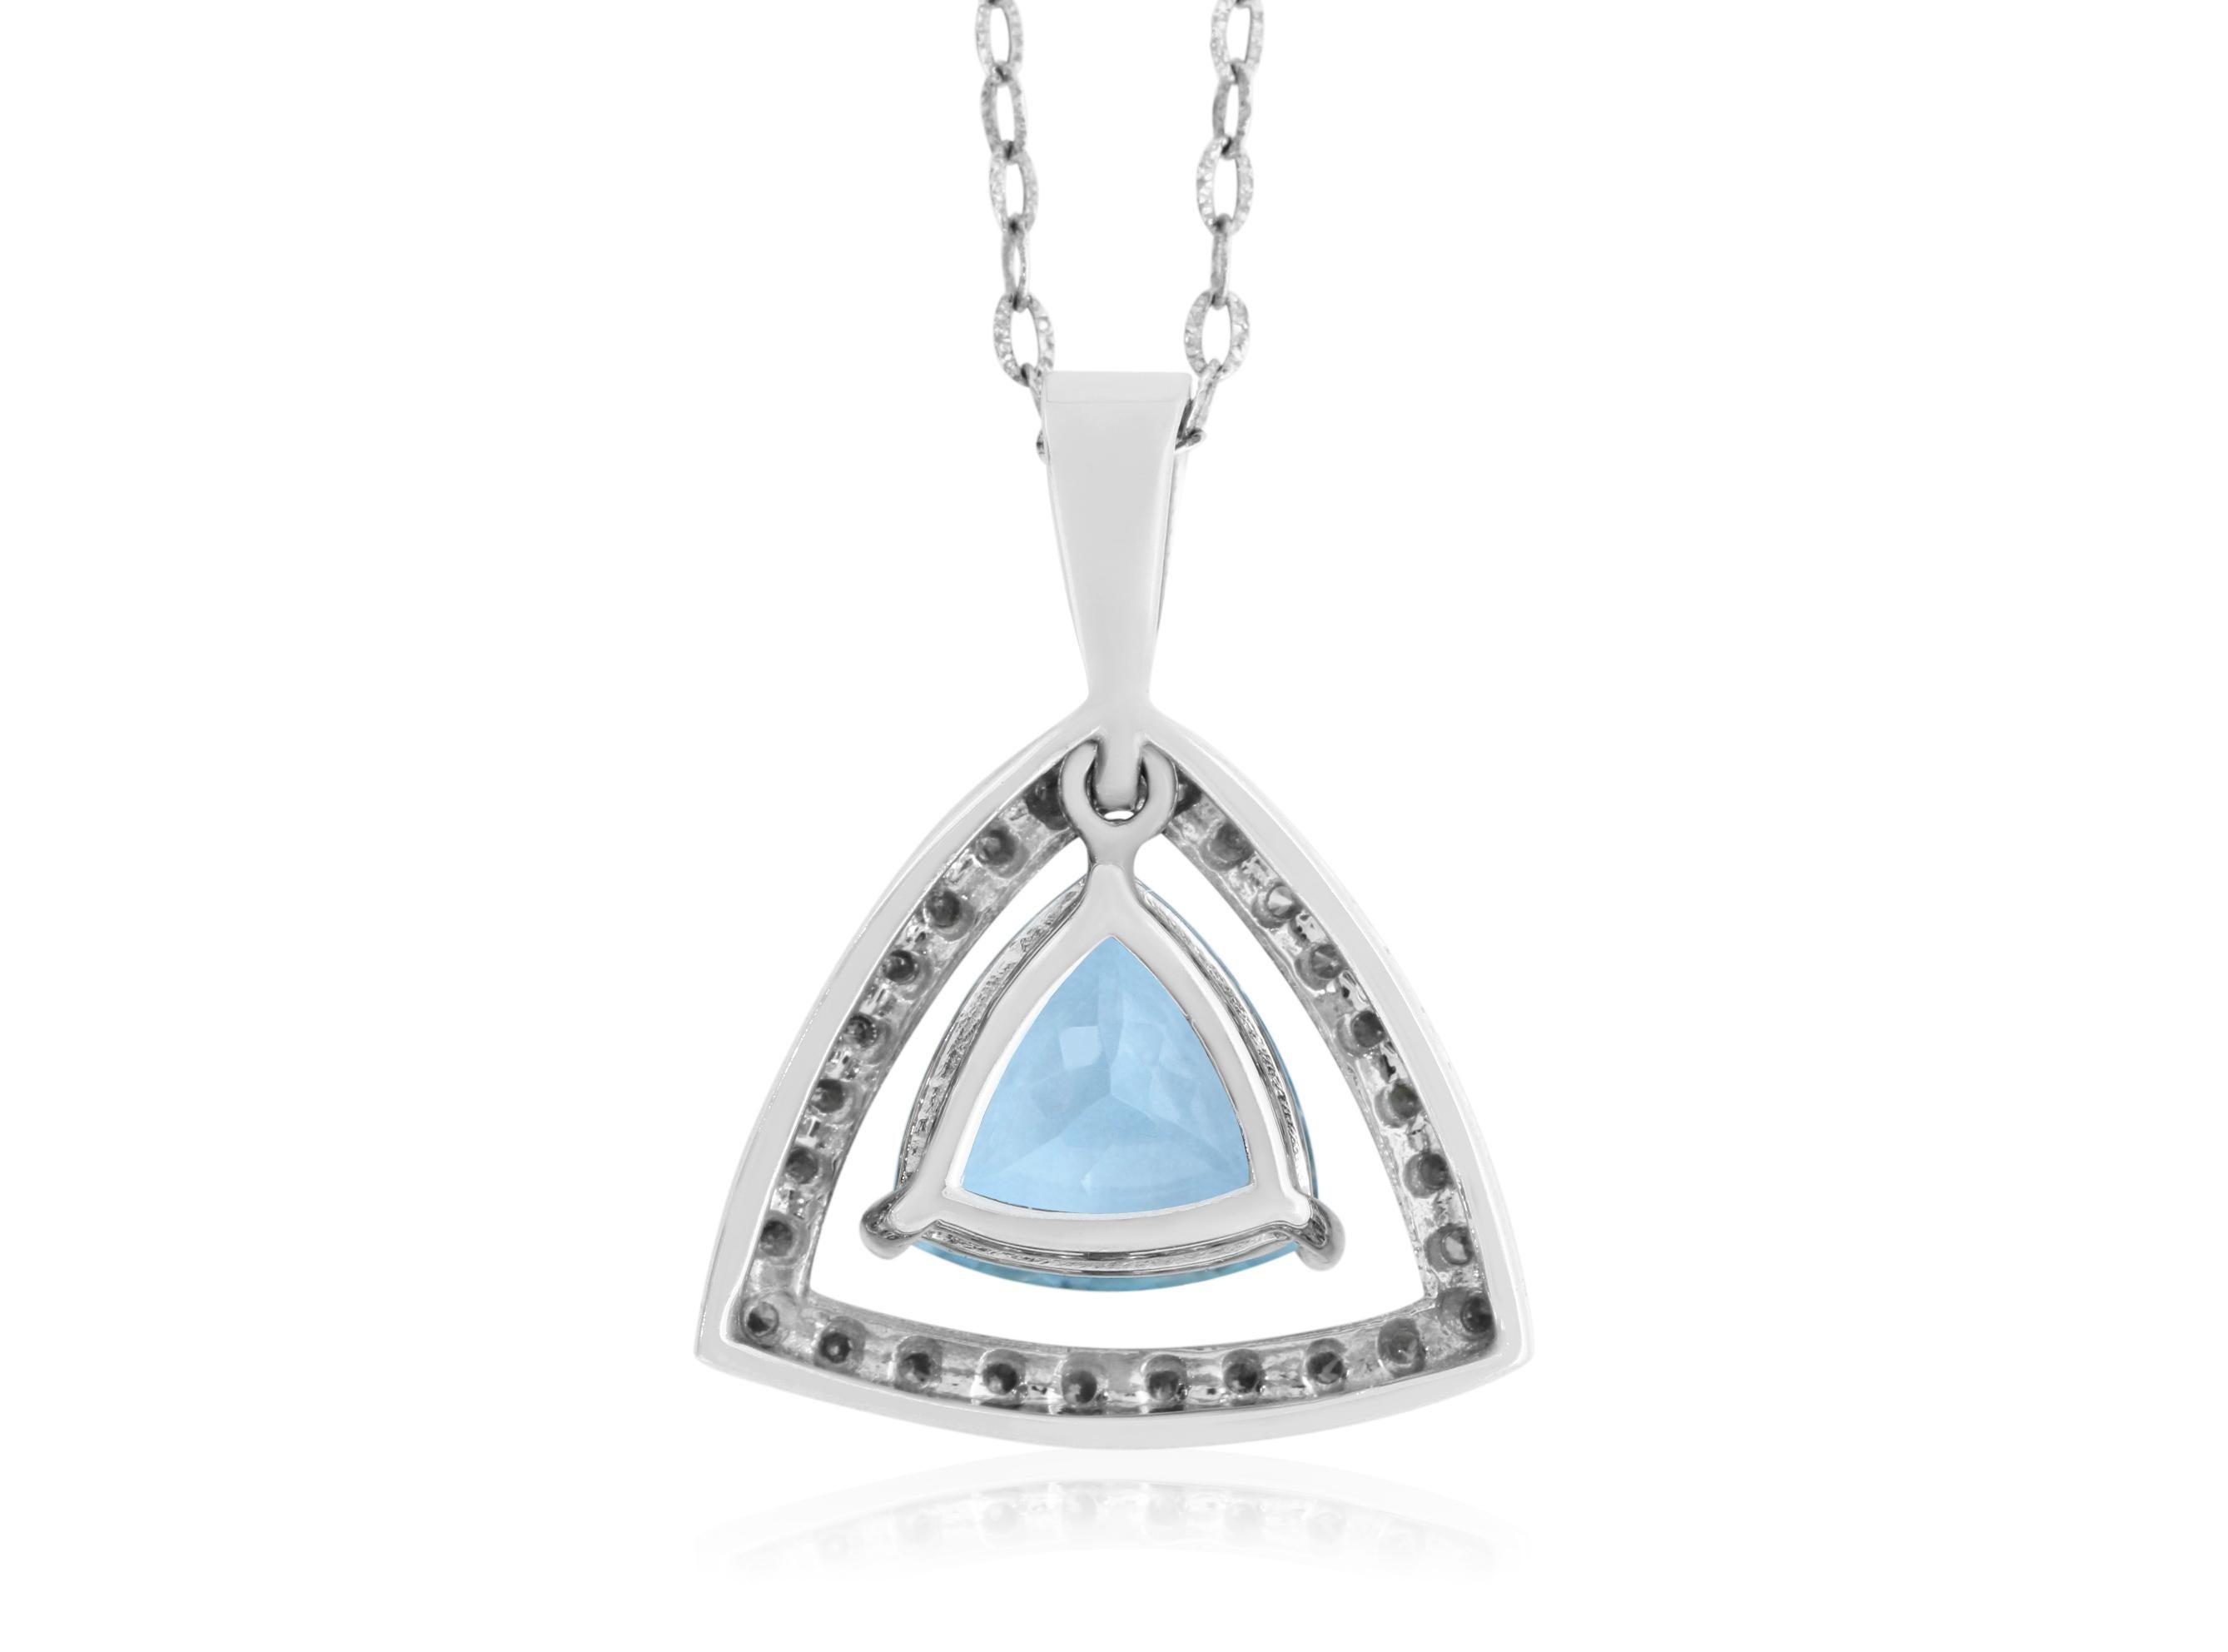 This unique pendant features a dangling trillion aquamarine center stone!

Material: 14k White Gold 
Gemstone:  2.95 Carat Trillion Cut Aquamarine Pendant measuring 10x10 mm
Diamond:  27 Round Diamonds at 0.54 Carats.  SI Quality /  H-I Color
Chain: